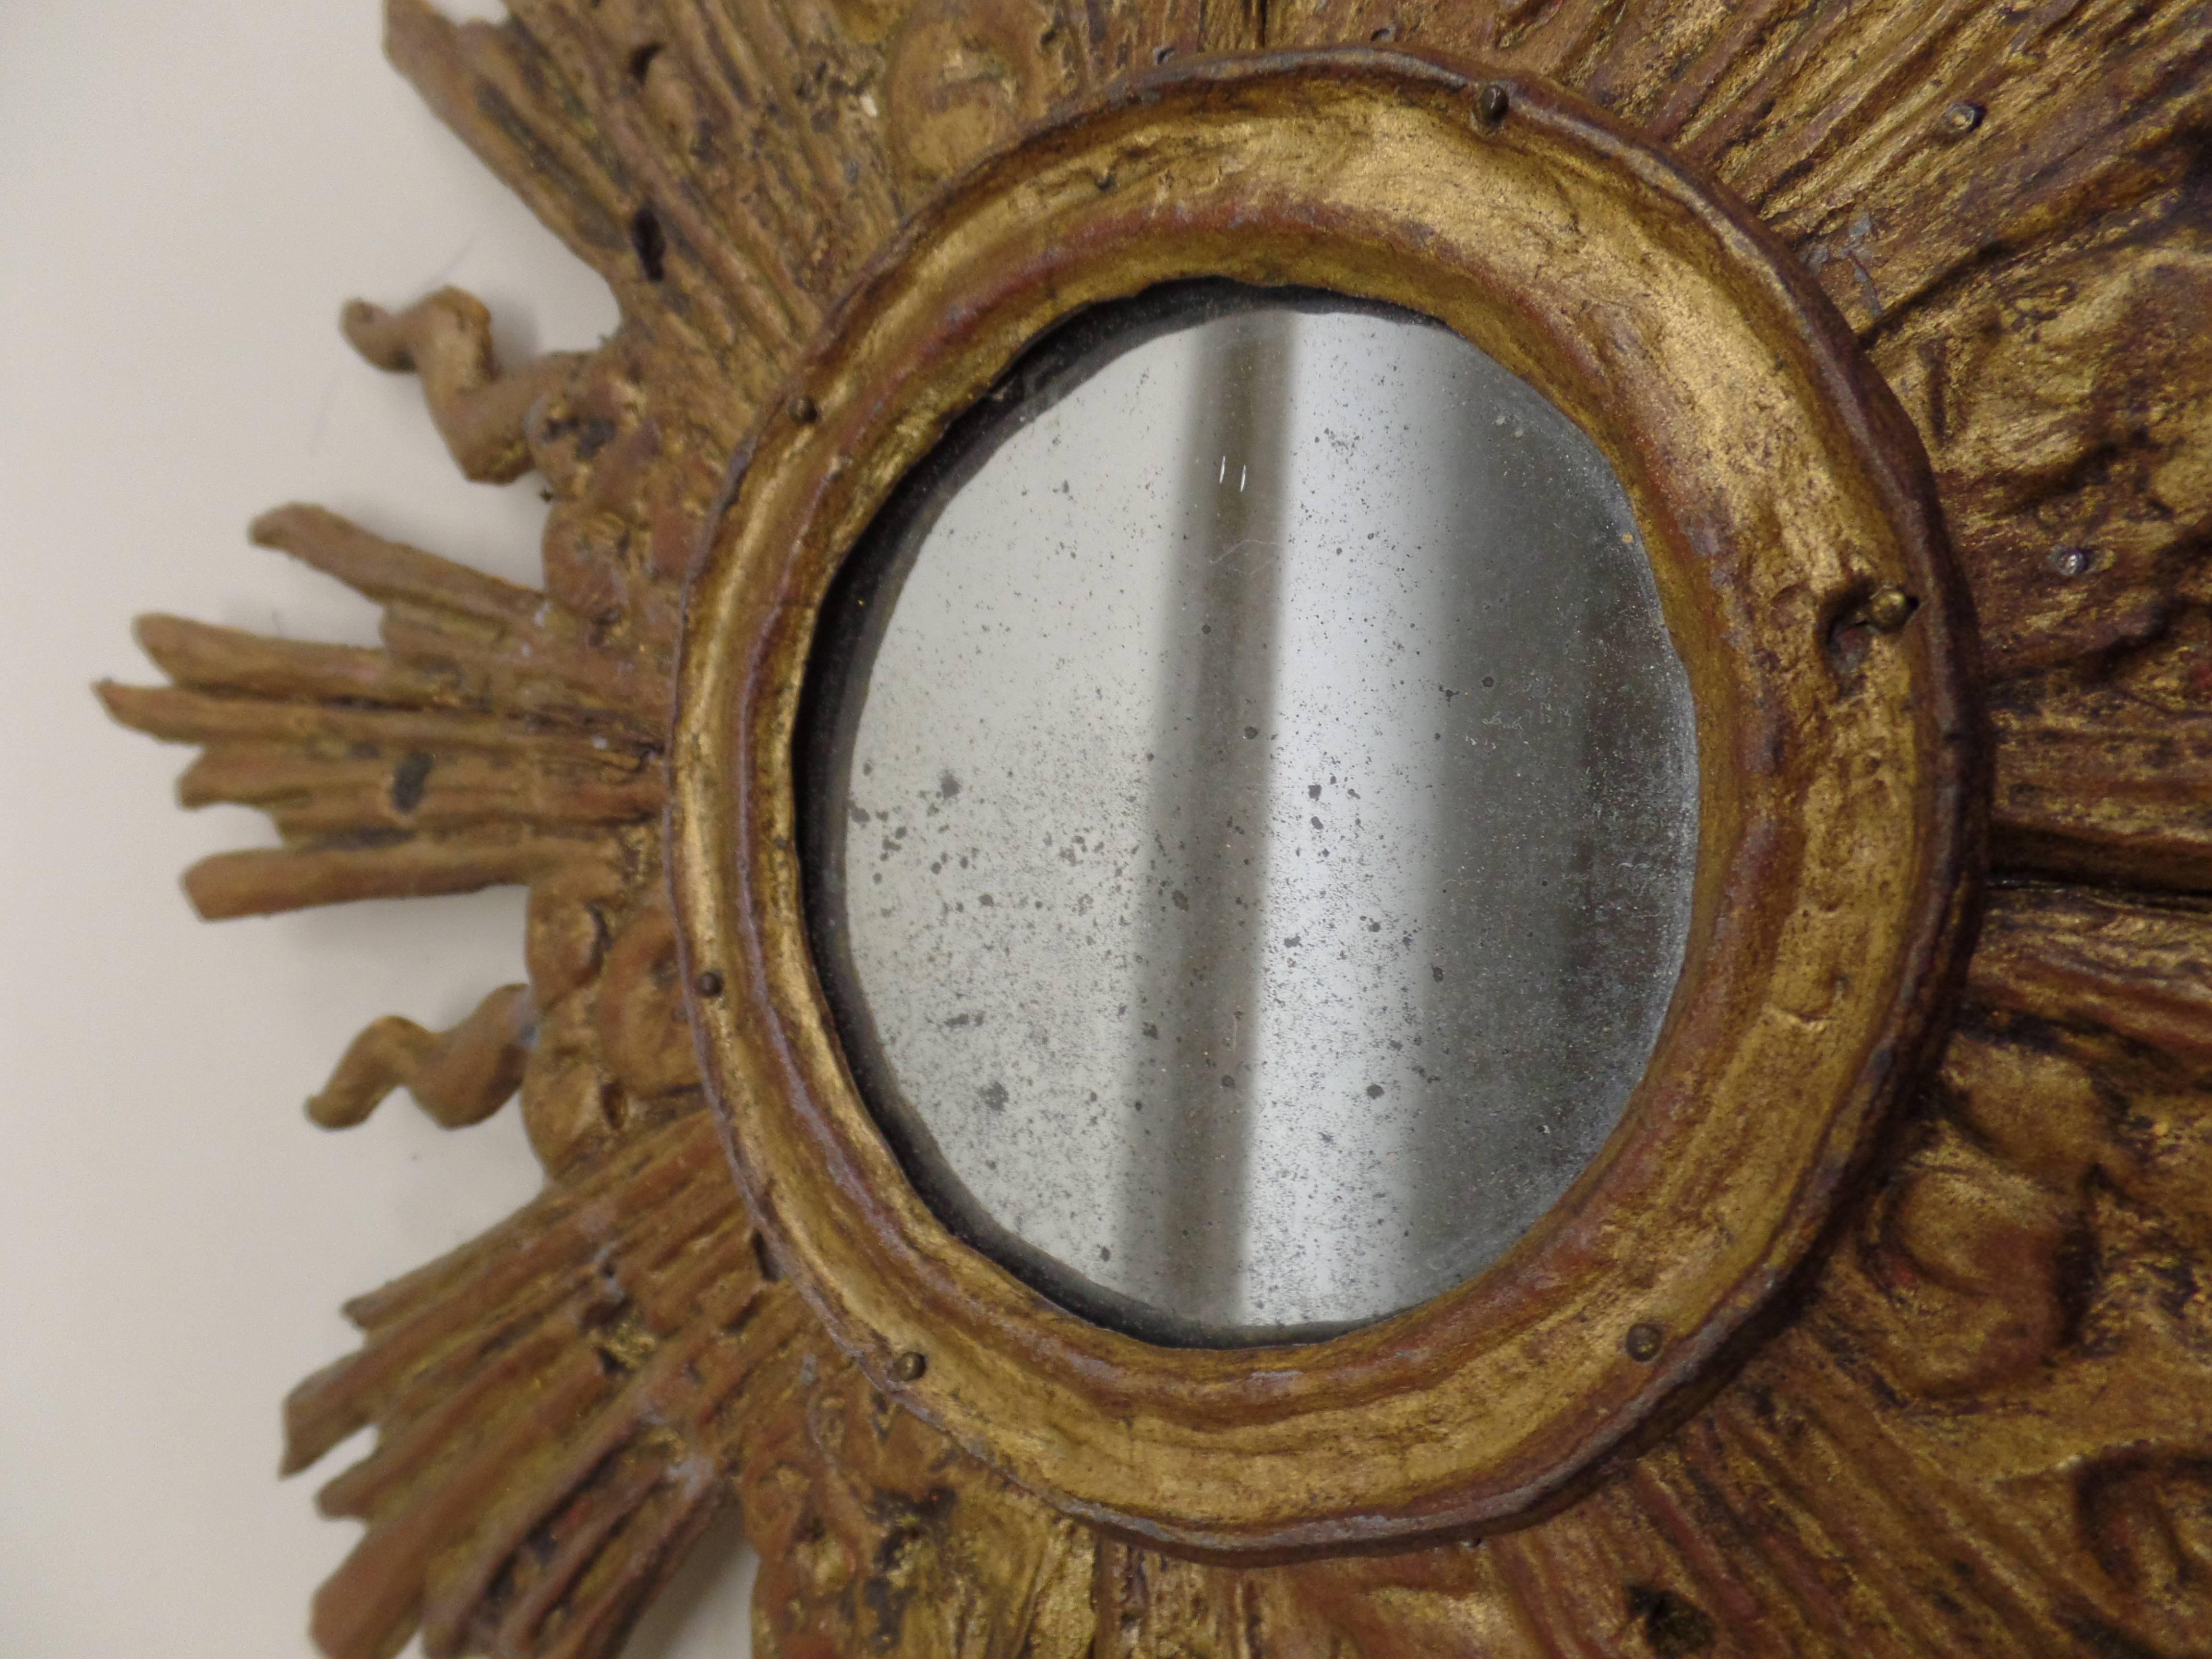 French Modern Neoclassical Gilt Lead Sunburst Mirror Attributed to Maison Jansen For Sale 2